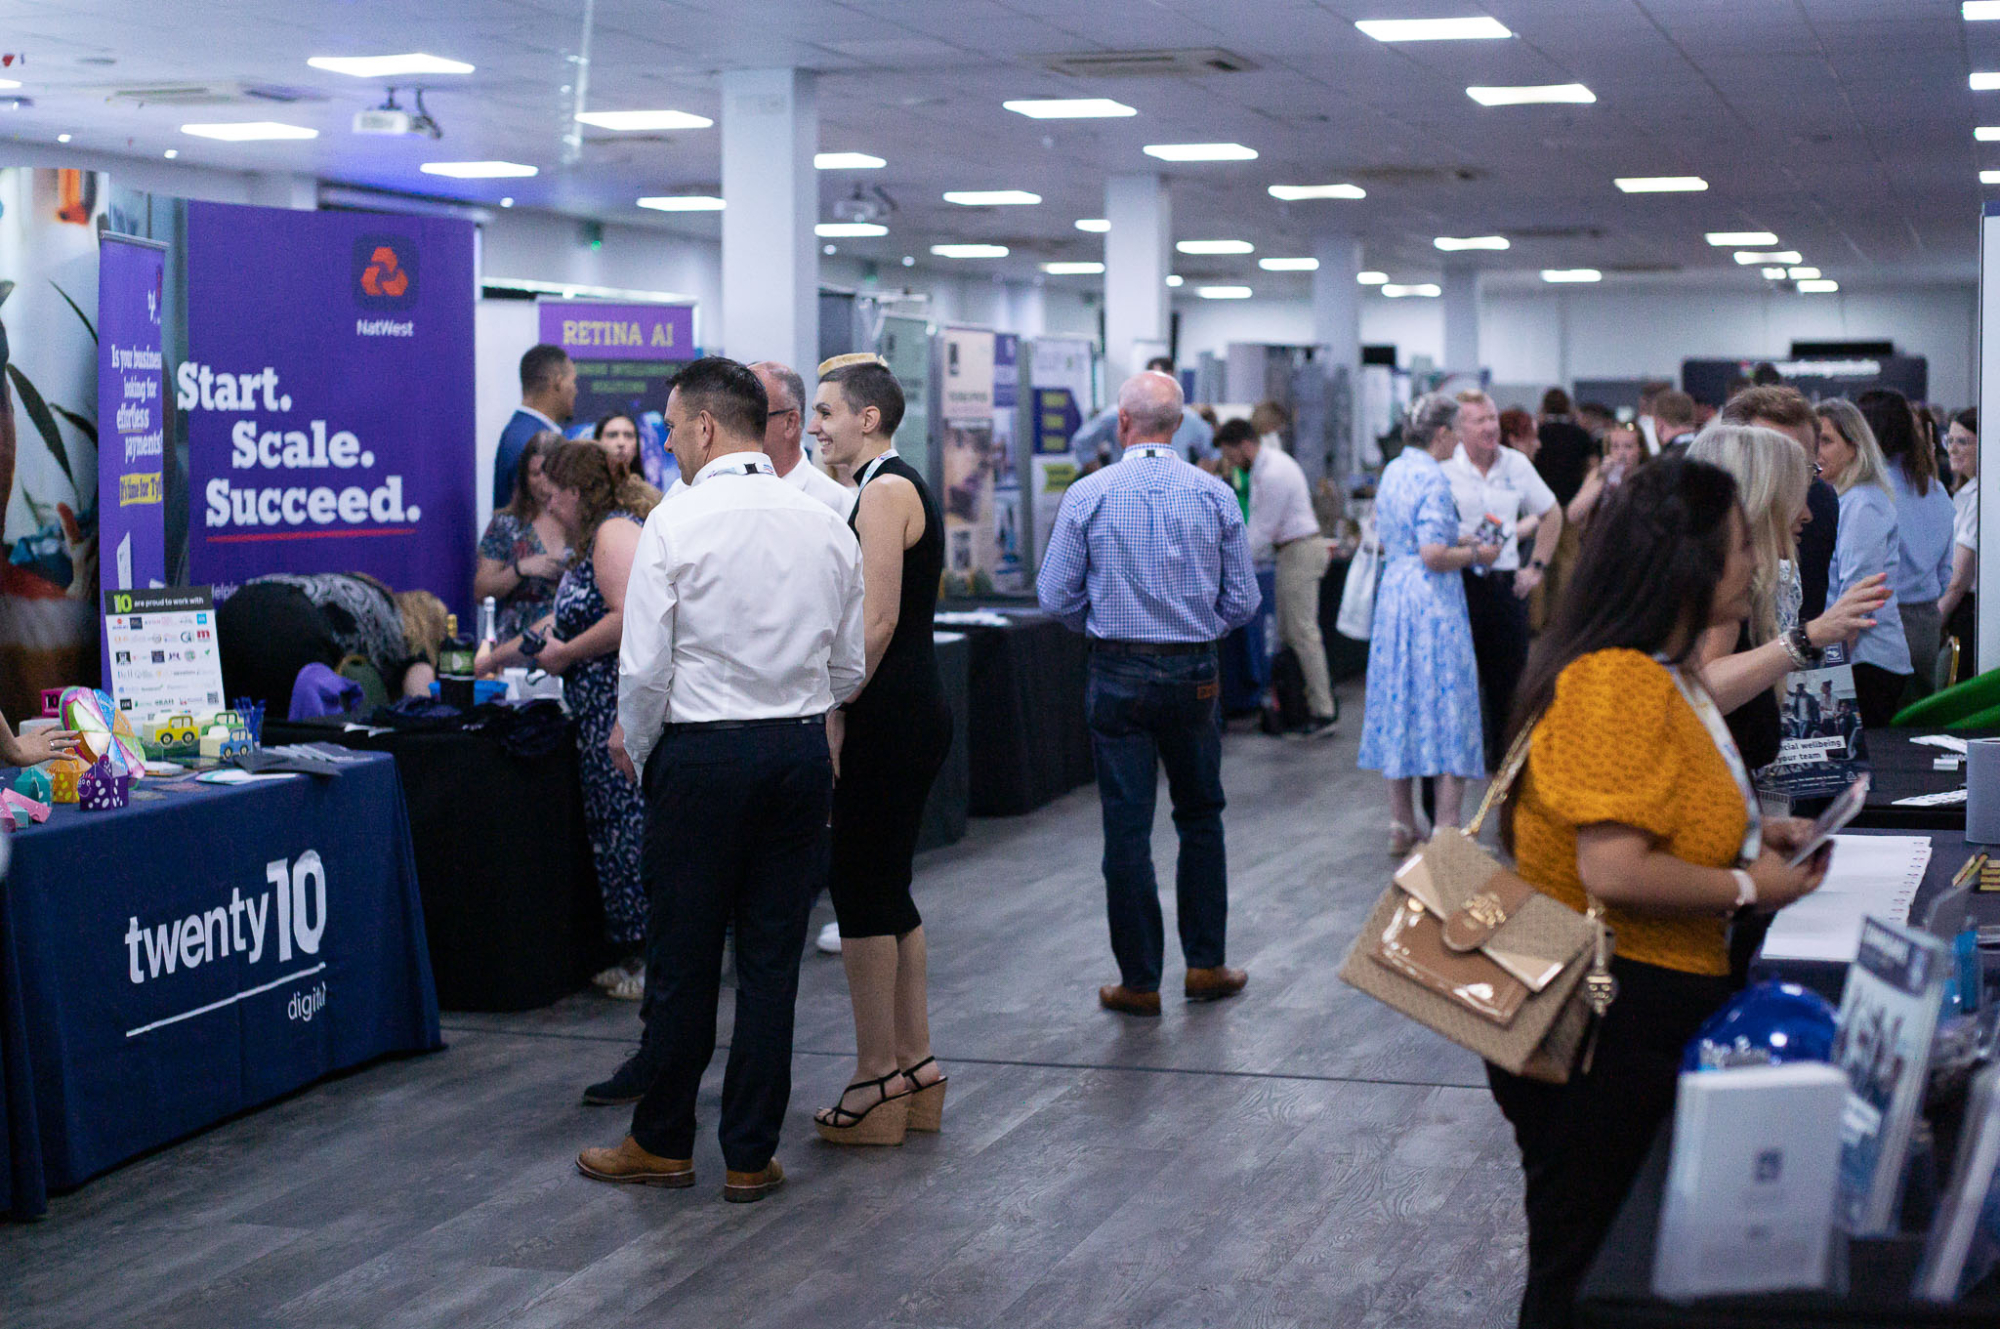 Northamptonshire Business Exhibition Visitors | Northamptonshire Chamber of Commerce